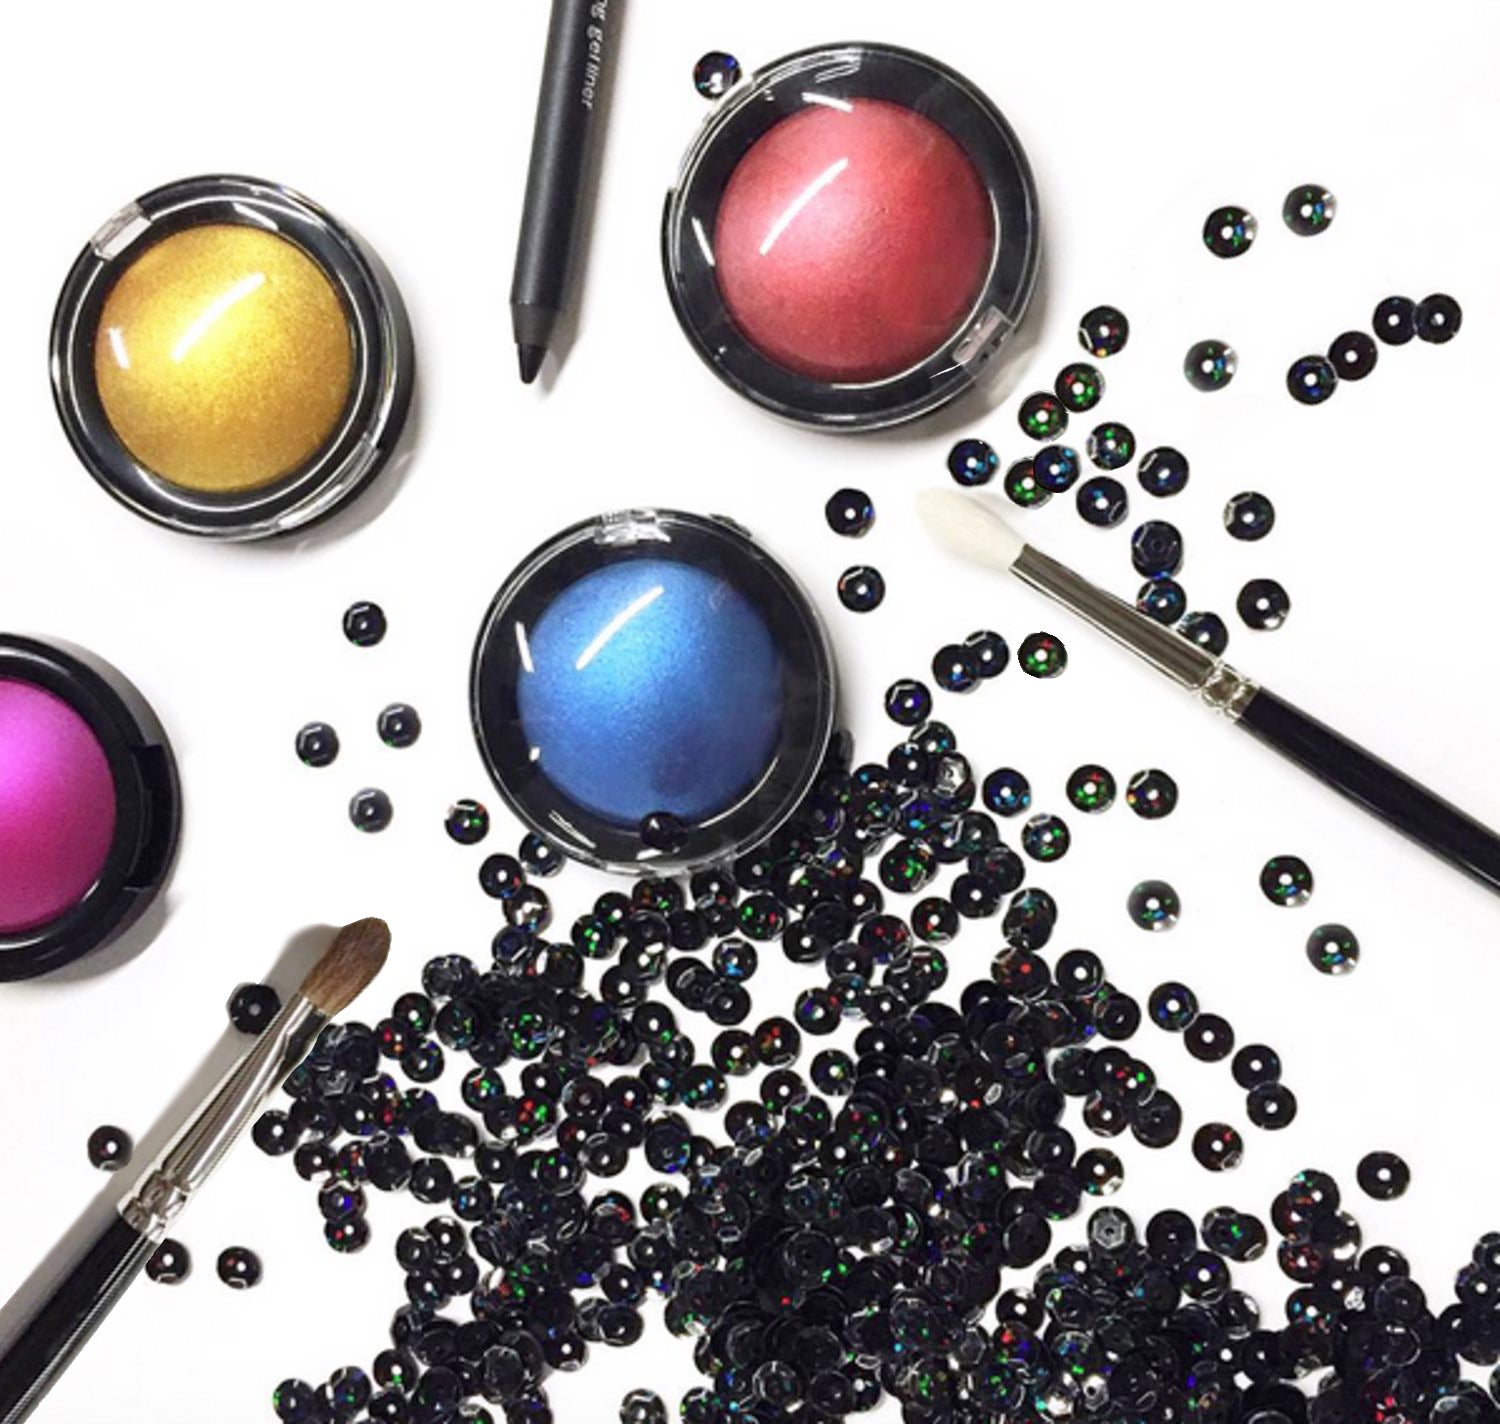 We Tried It: 3 Gorgeous Looks From Pat McGrath's Phantom 002 Collection